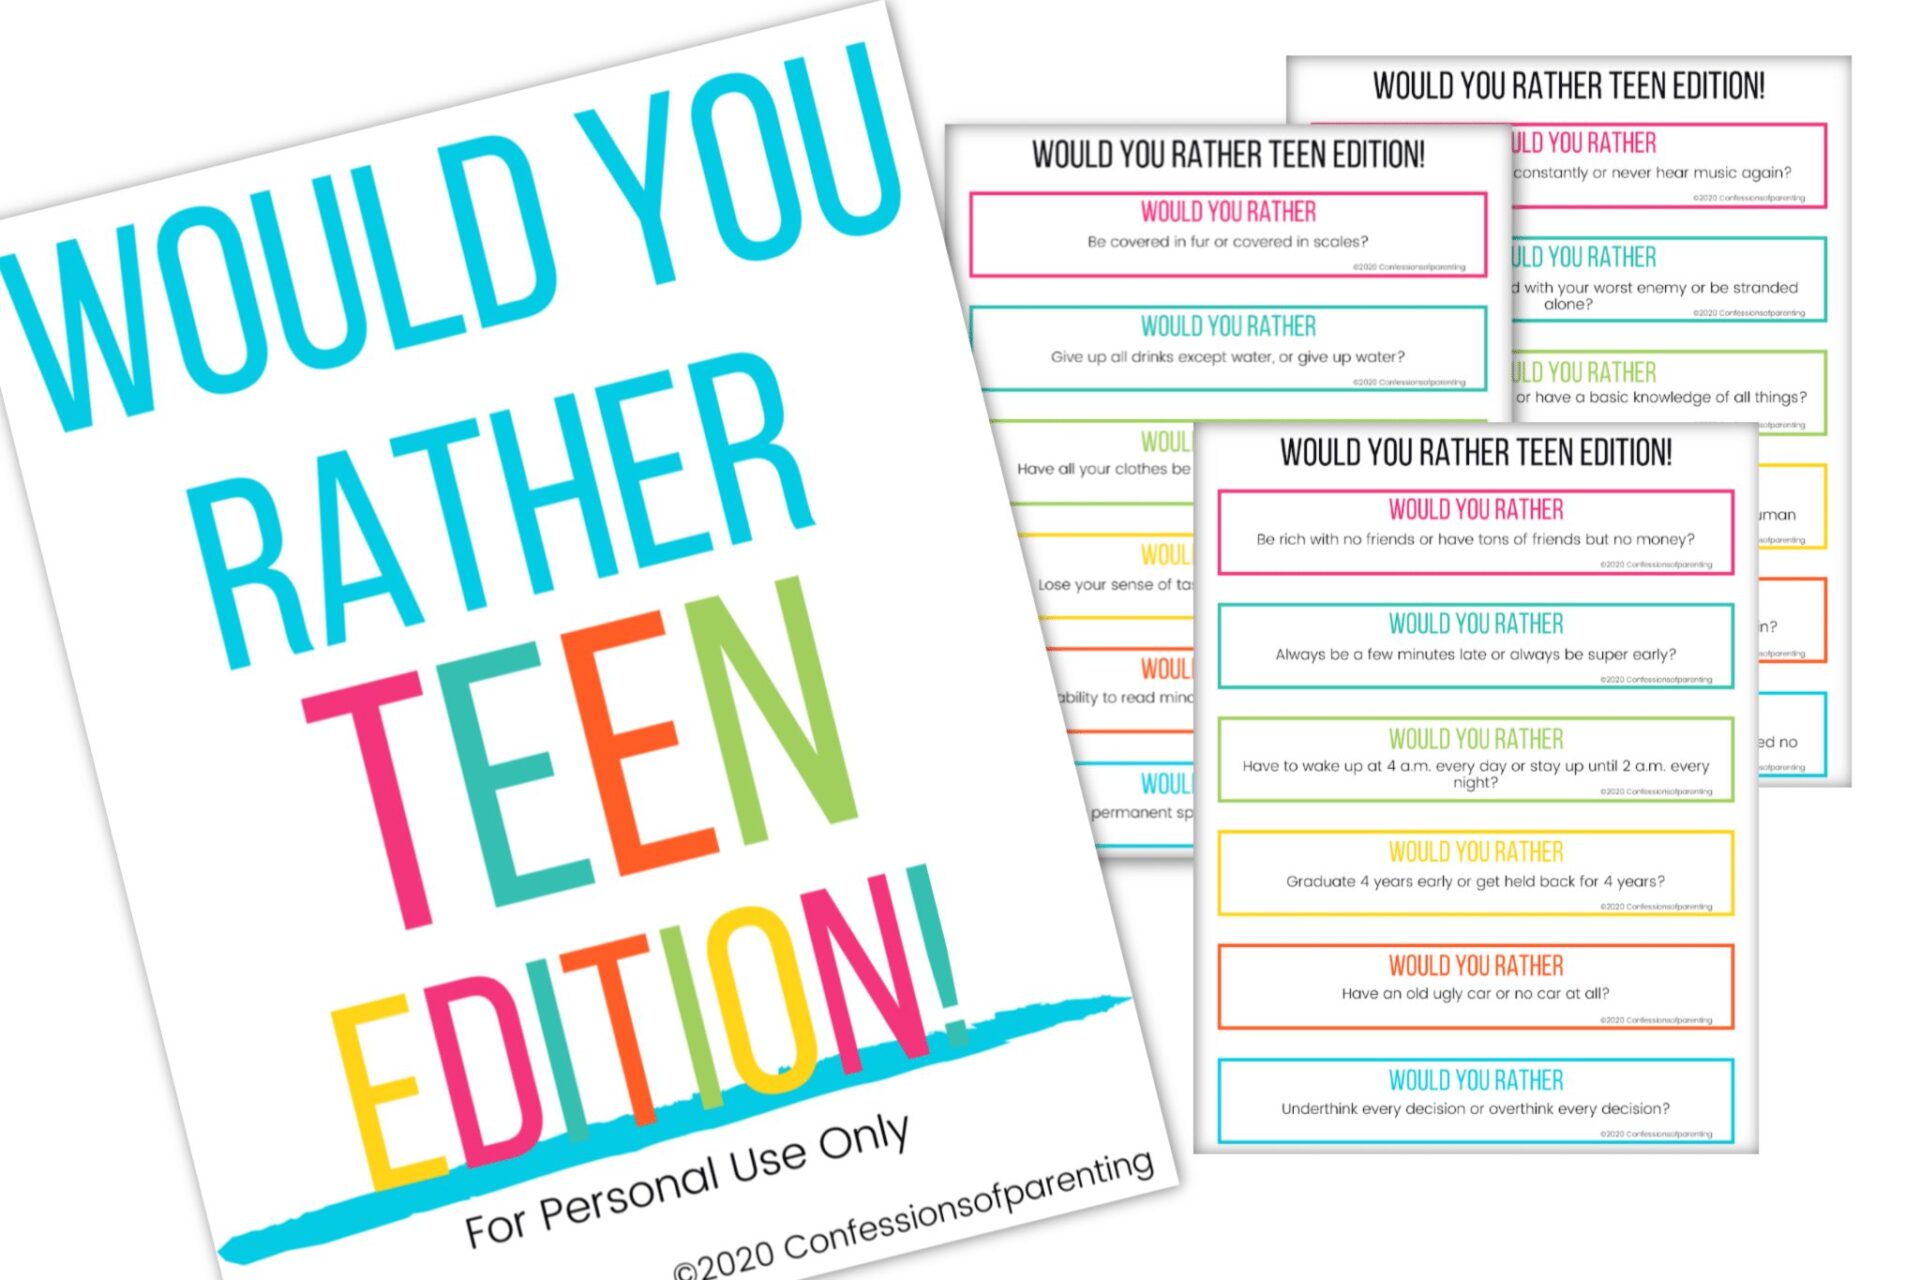 250+ Would You Rather Questions for Teens